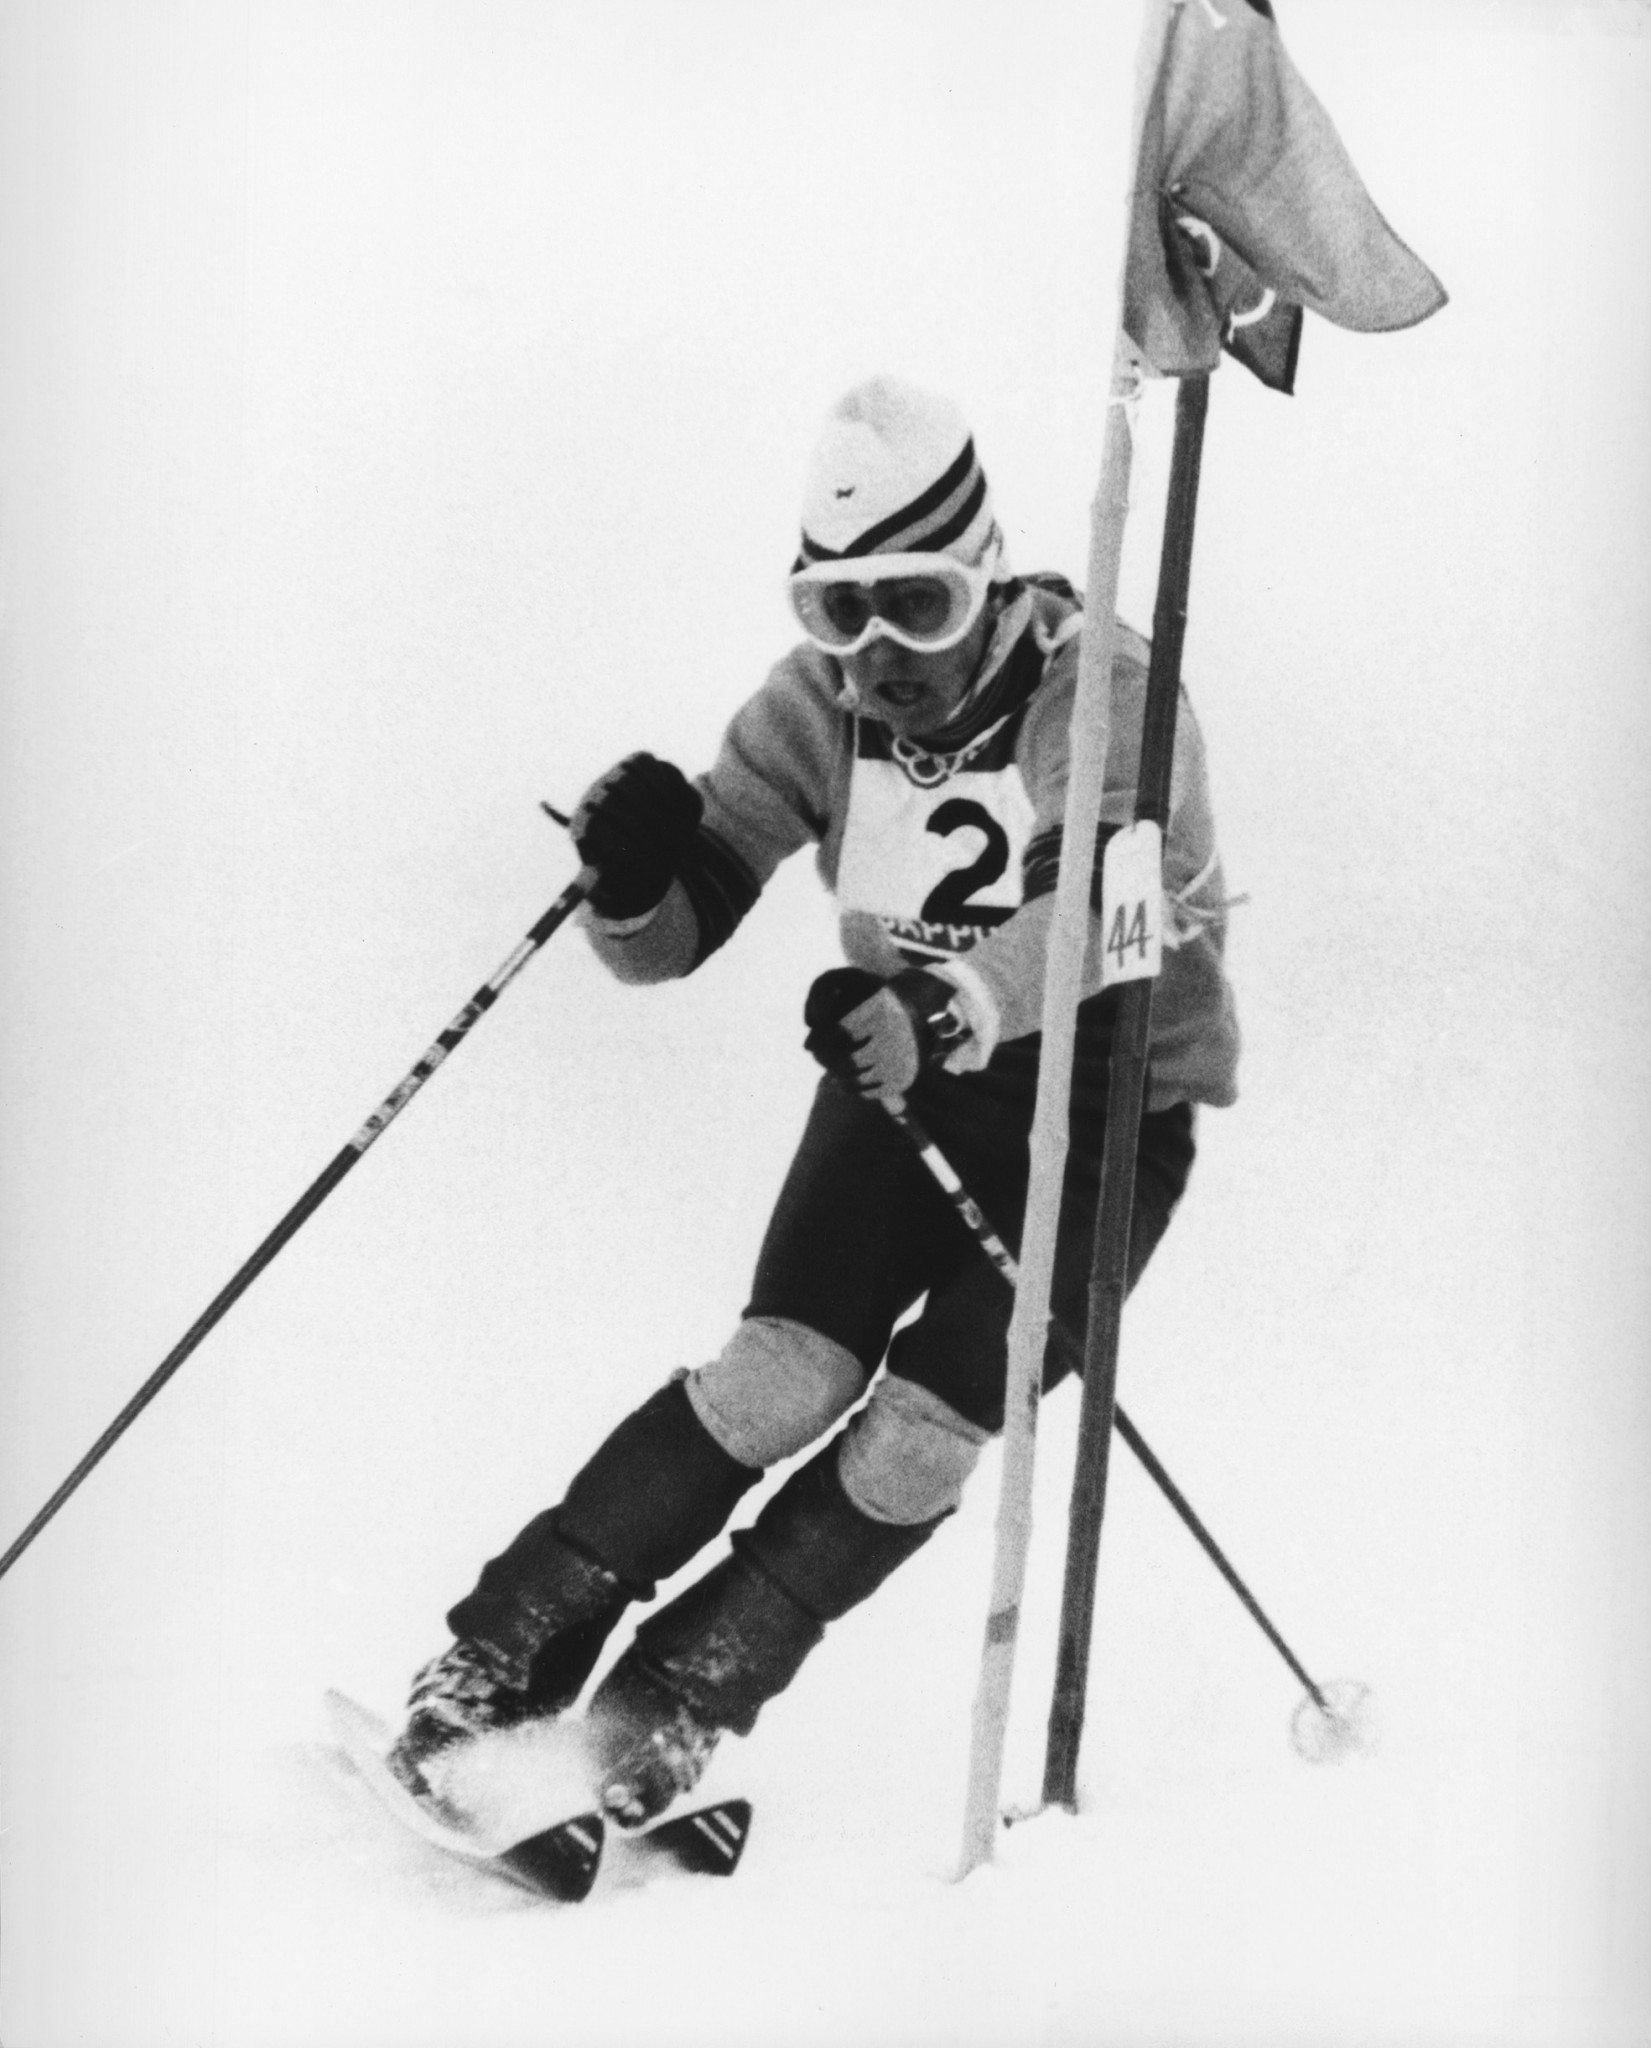 Spanish skier Francisco Fernández Ochoa skiing to slalom victory at Sapporo 1972. It remains Spain's only Winter Olympic gold medal ©Getty Images